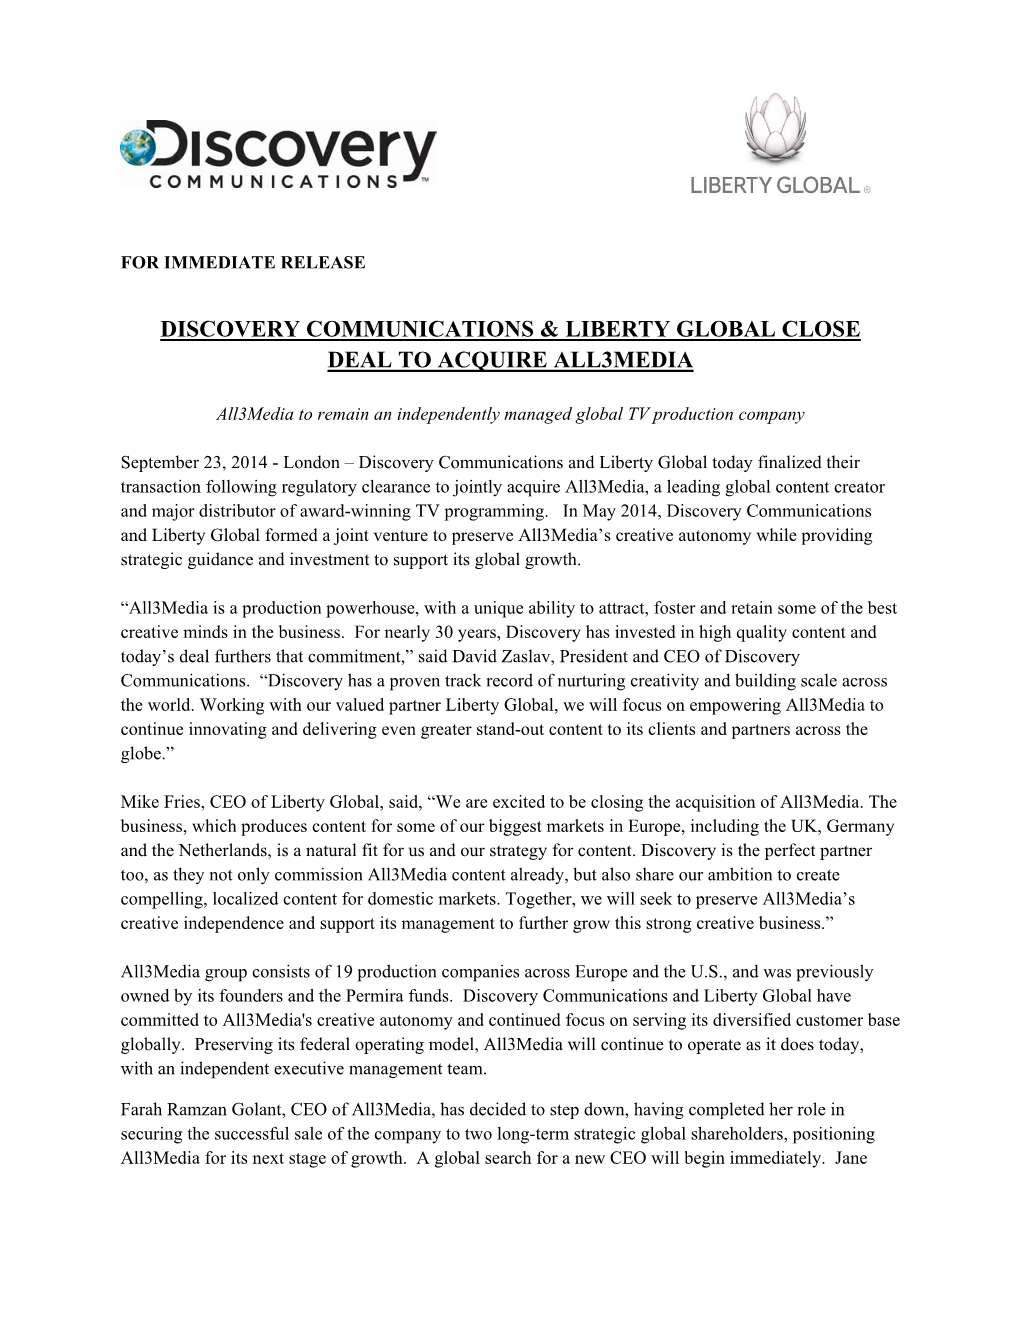 Discovery Communications & Liberty Global Close Deal to Acquire All3media